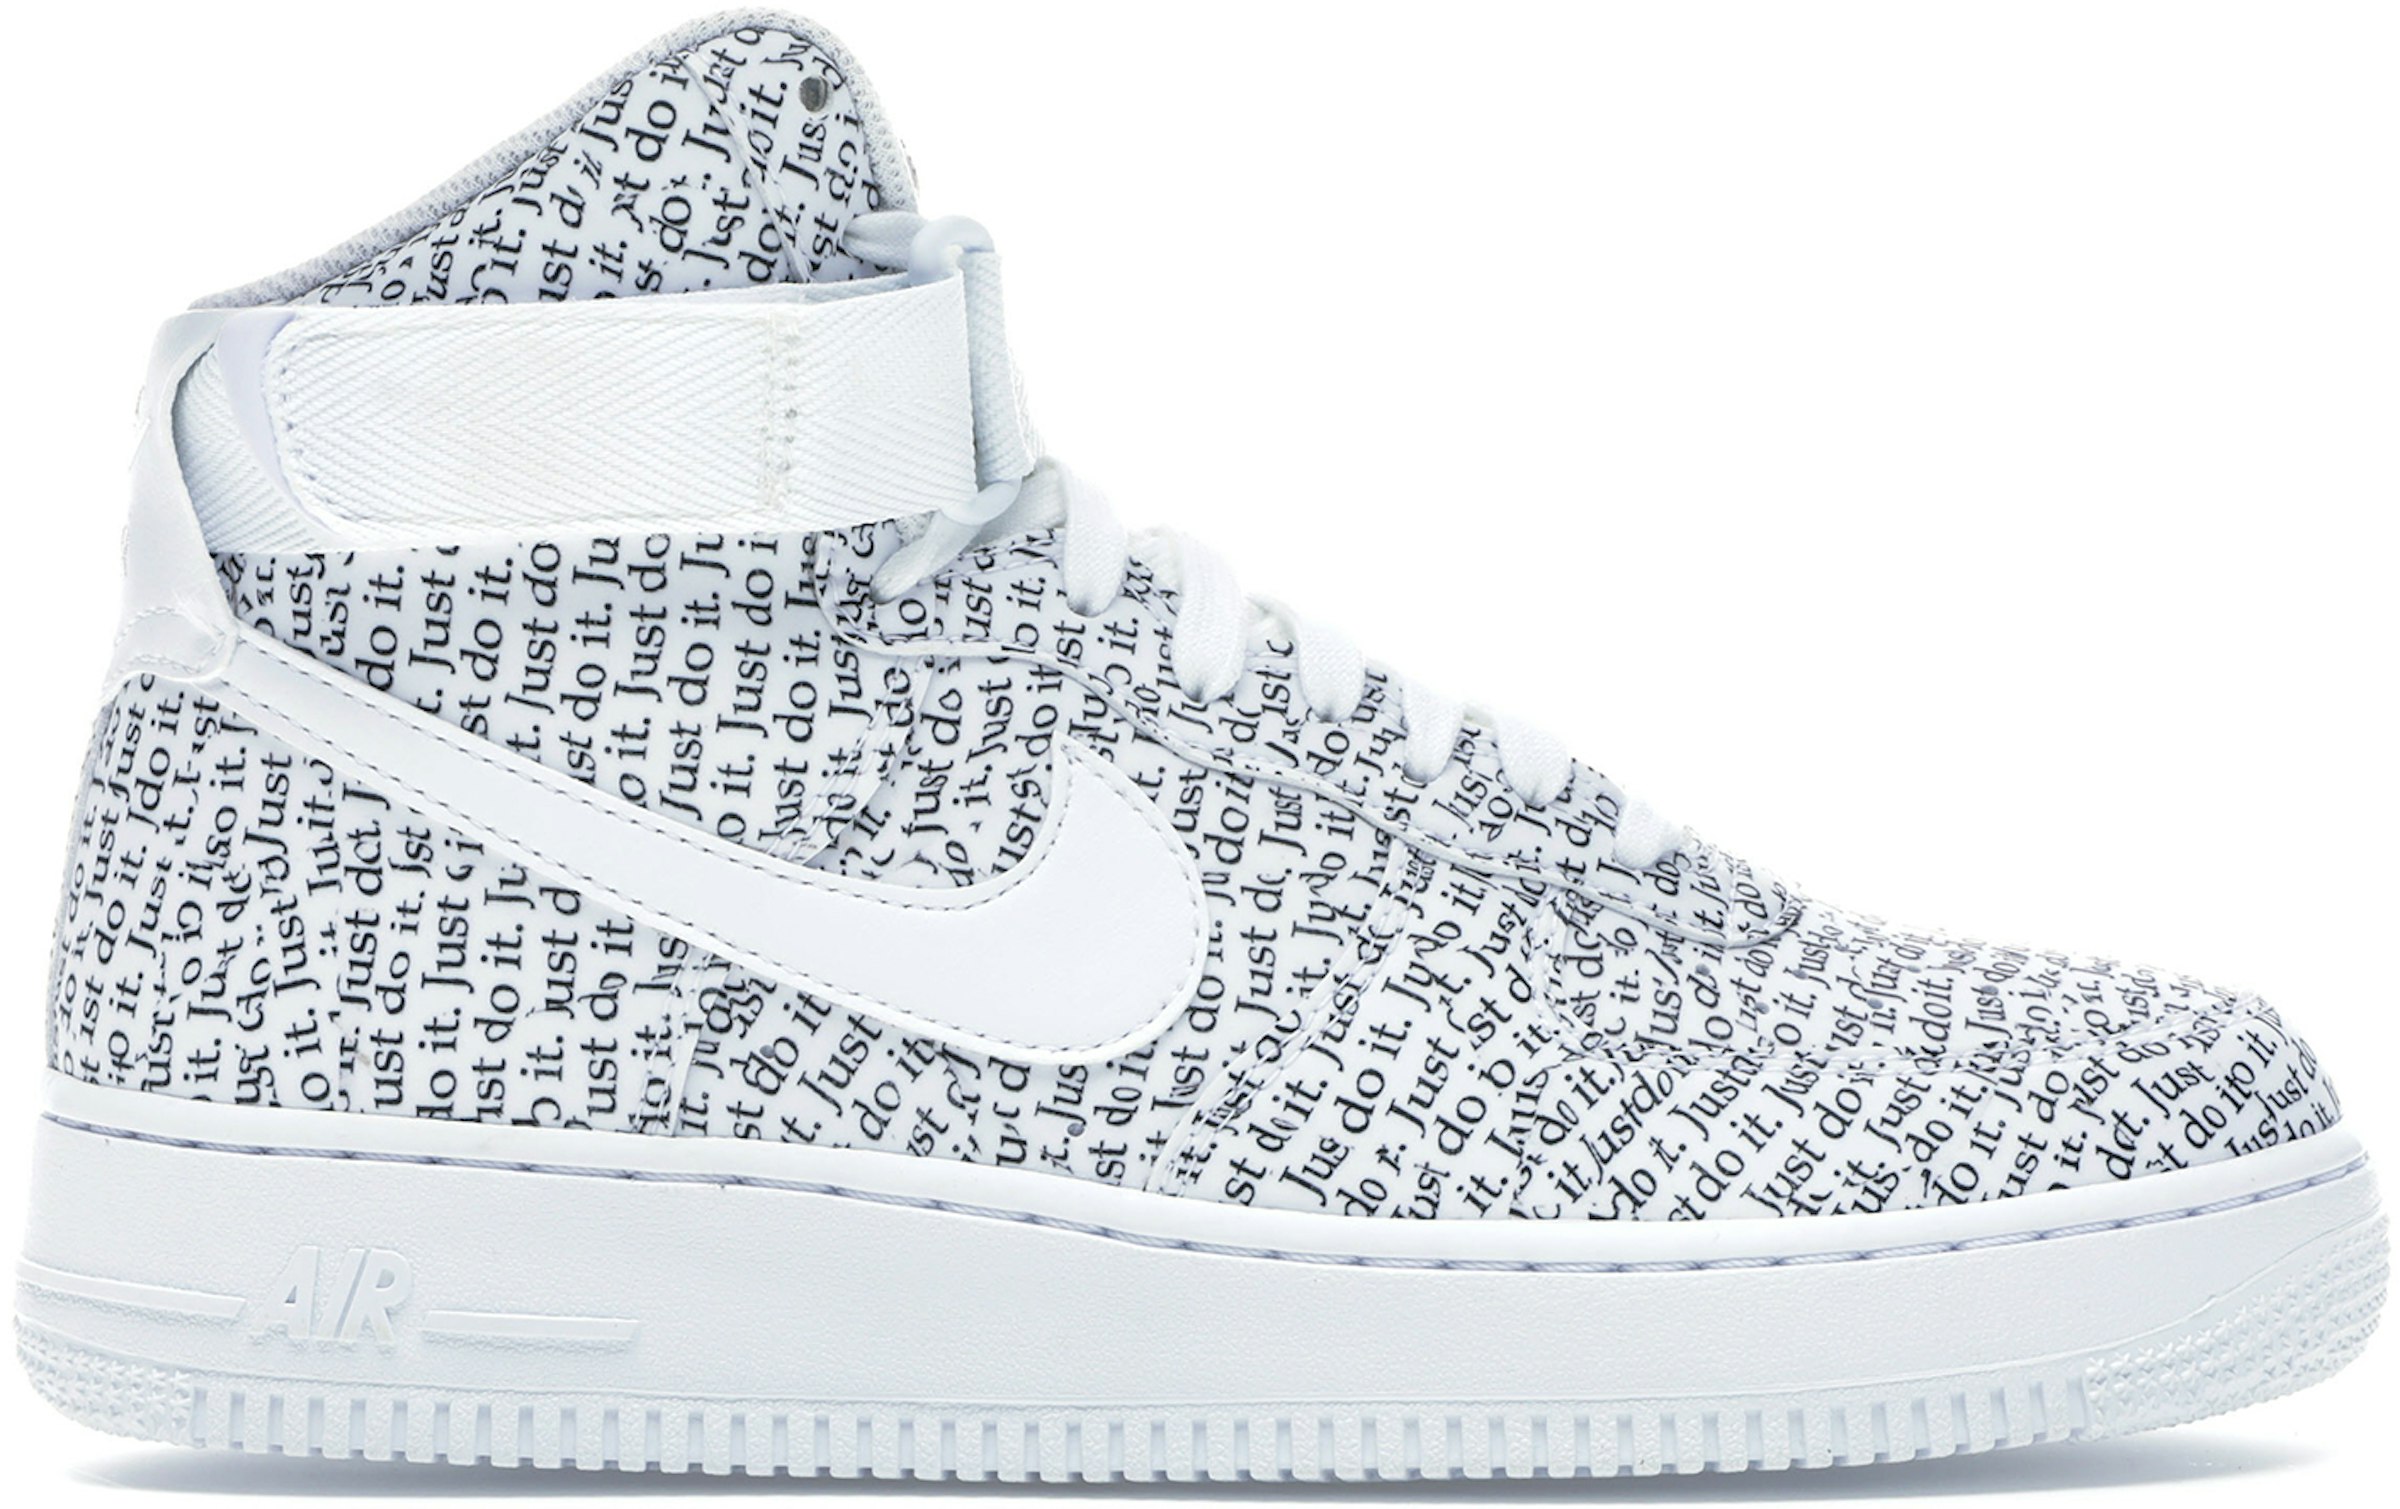 Air Force 1 Just Do It Pack White (Women's) - AO5138-100 US